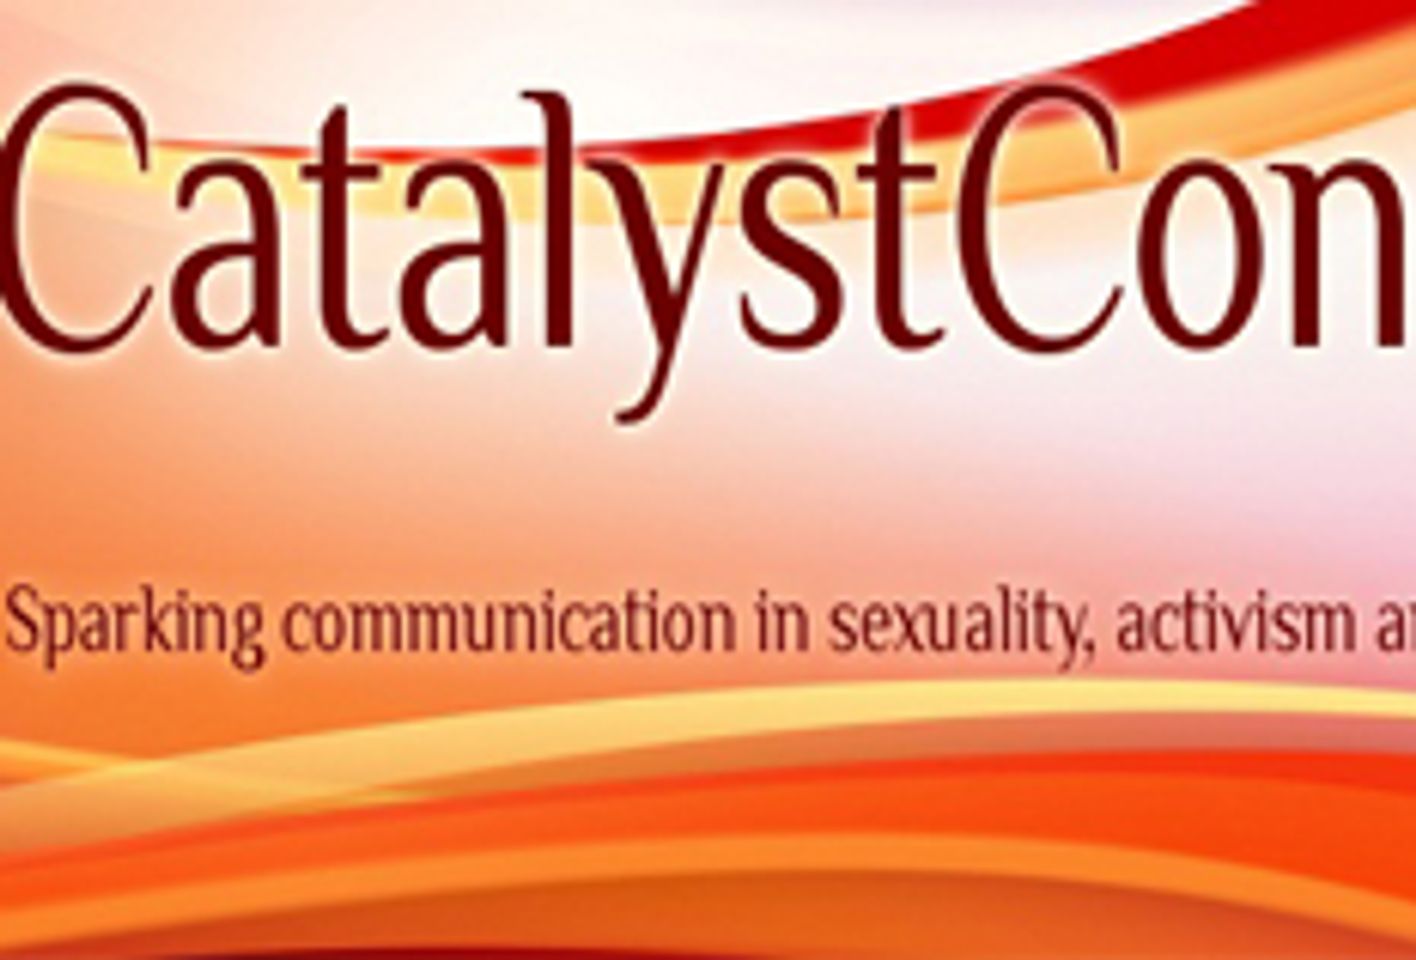 CatalystCon to Host Fundraisers For Scarleteen.com